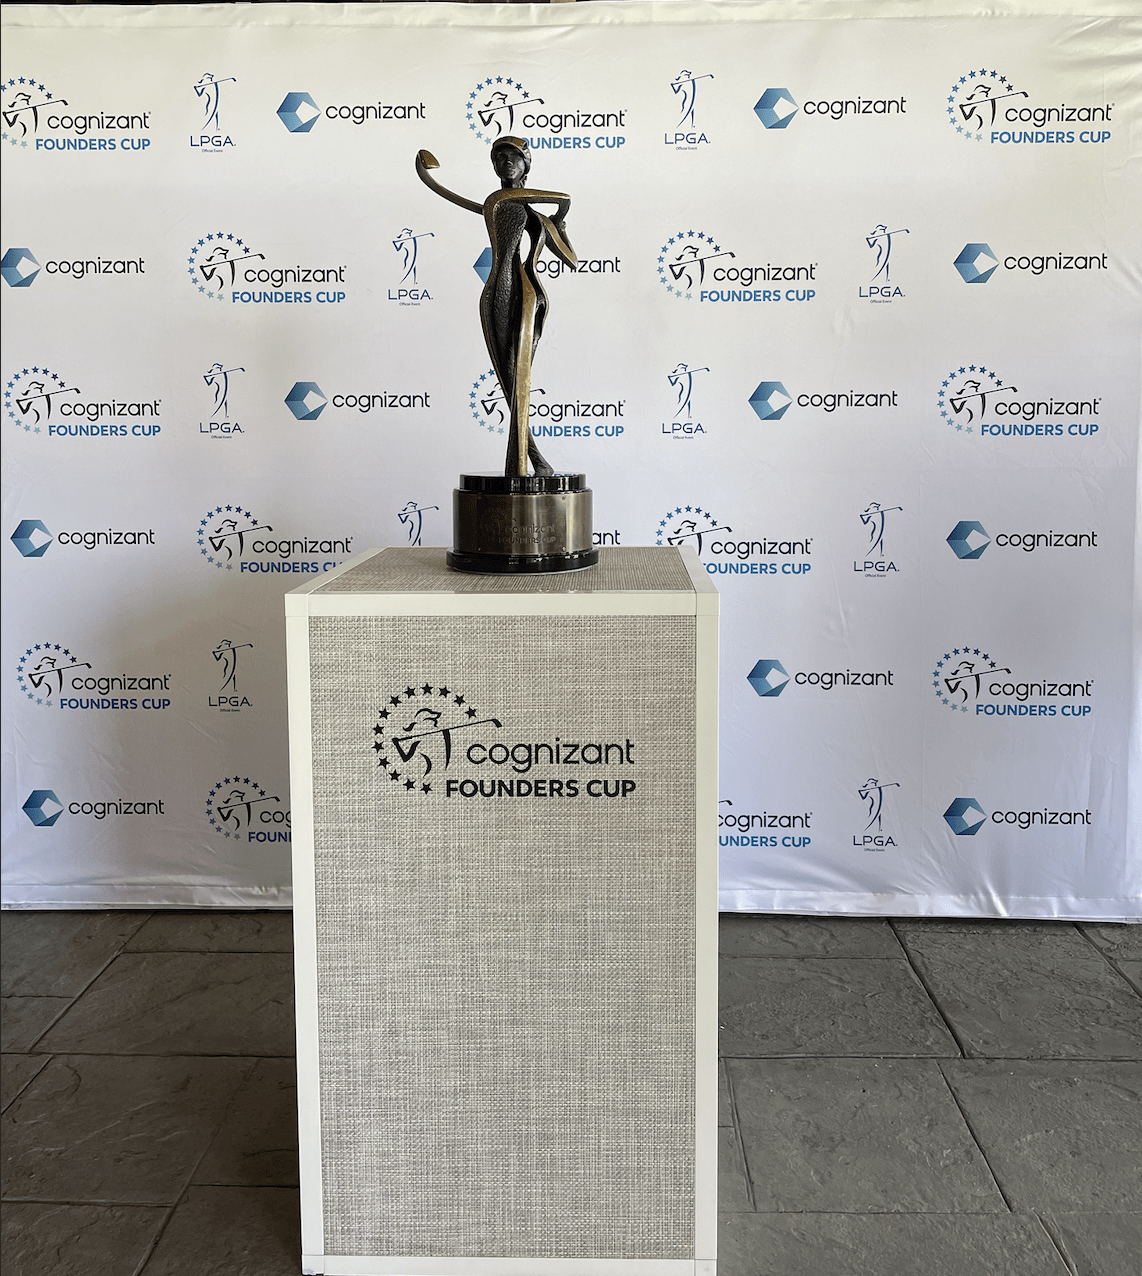 LPGA Cognizant Founders Cup Returns to North Jersey for the Second Year